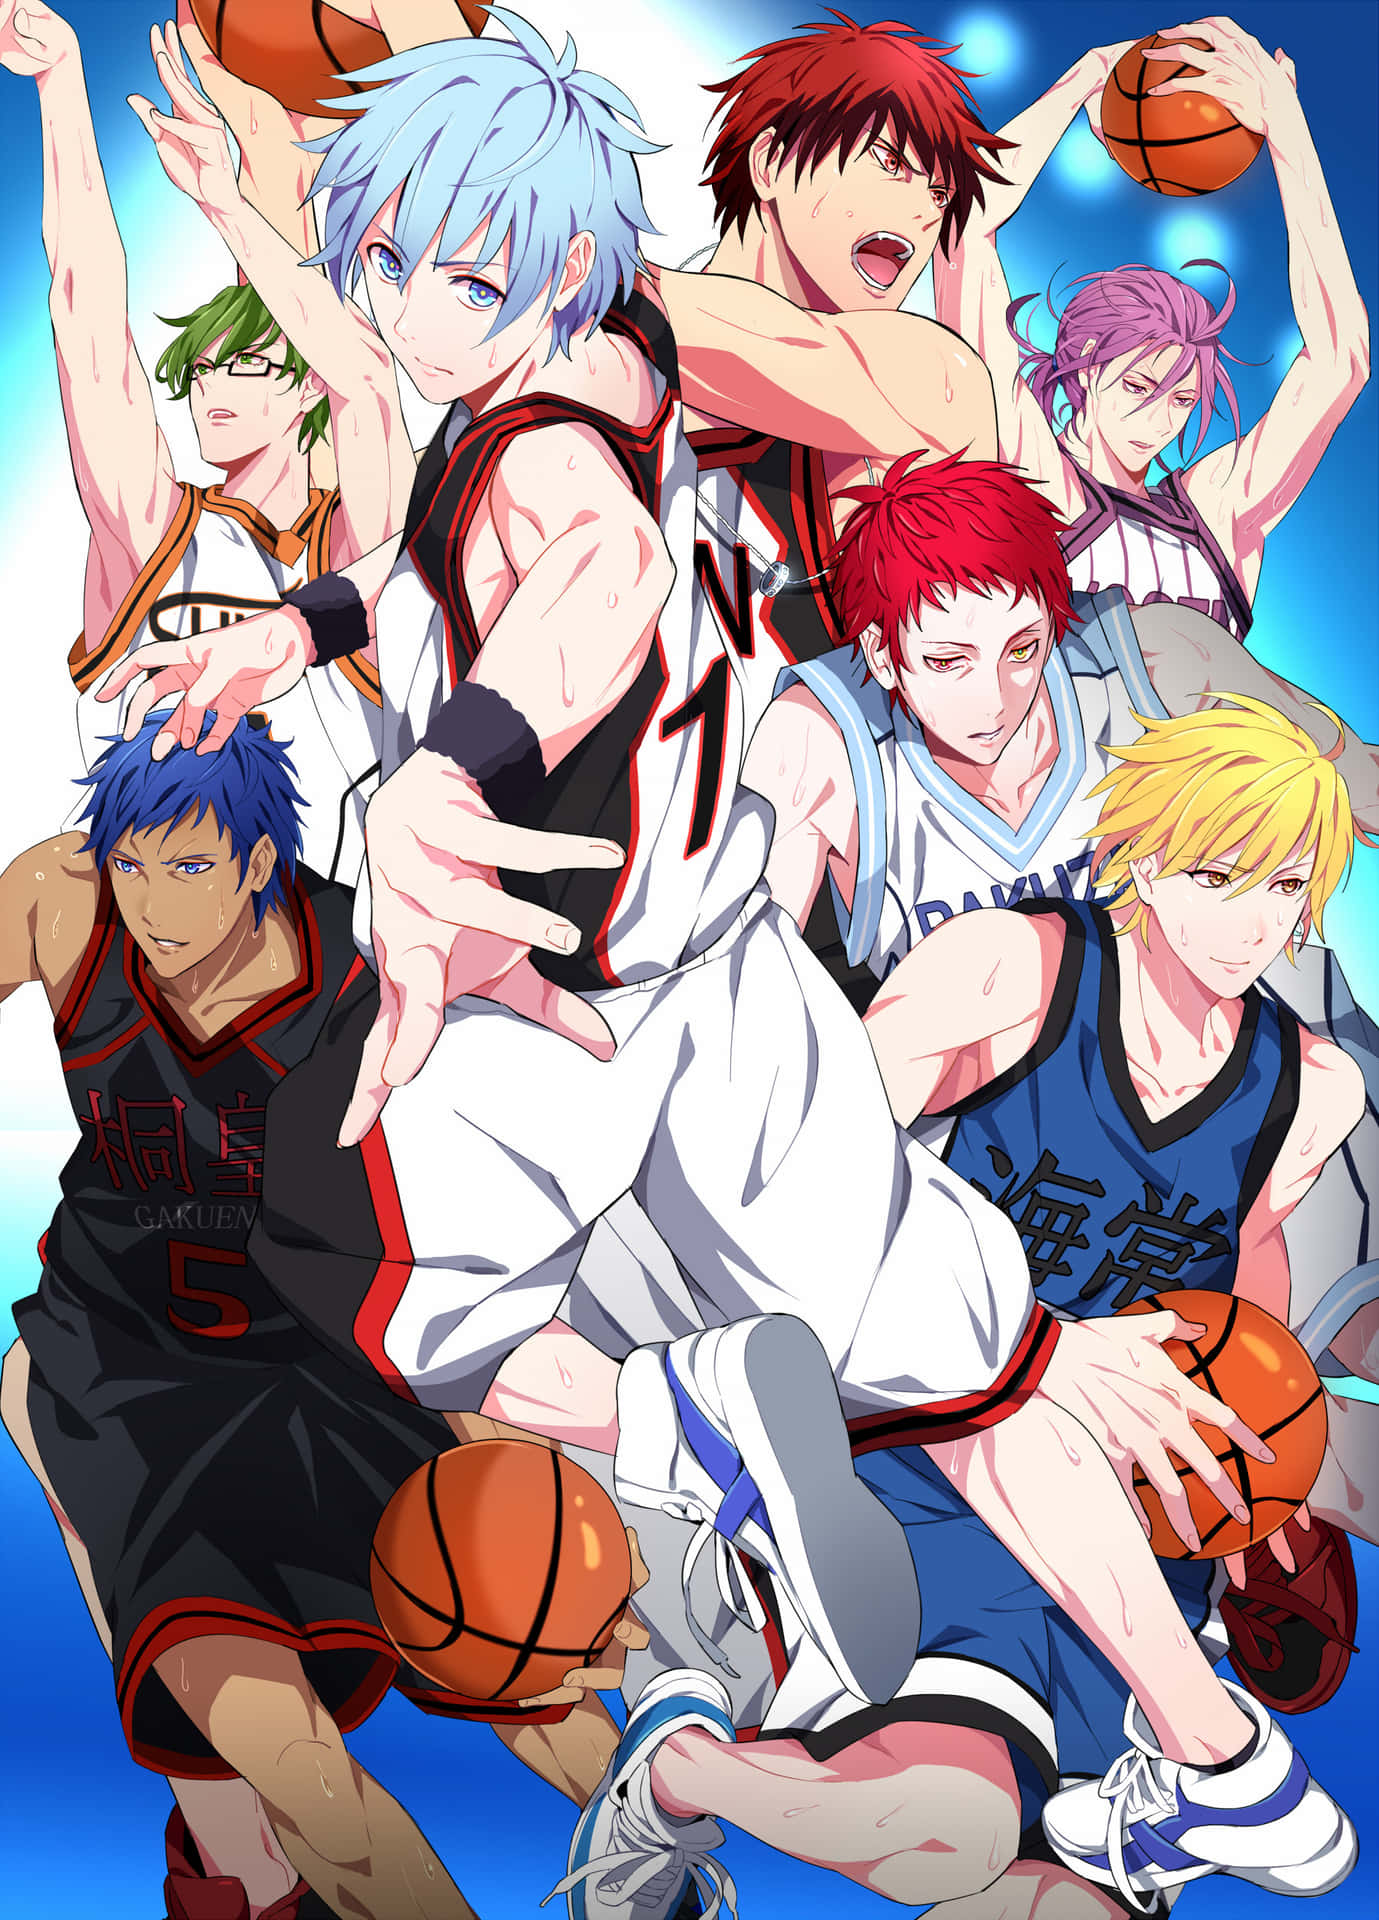 Look closely and discover the secrets of Kuroko No Basket